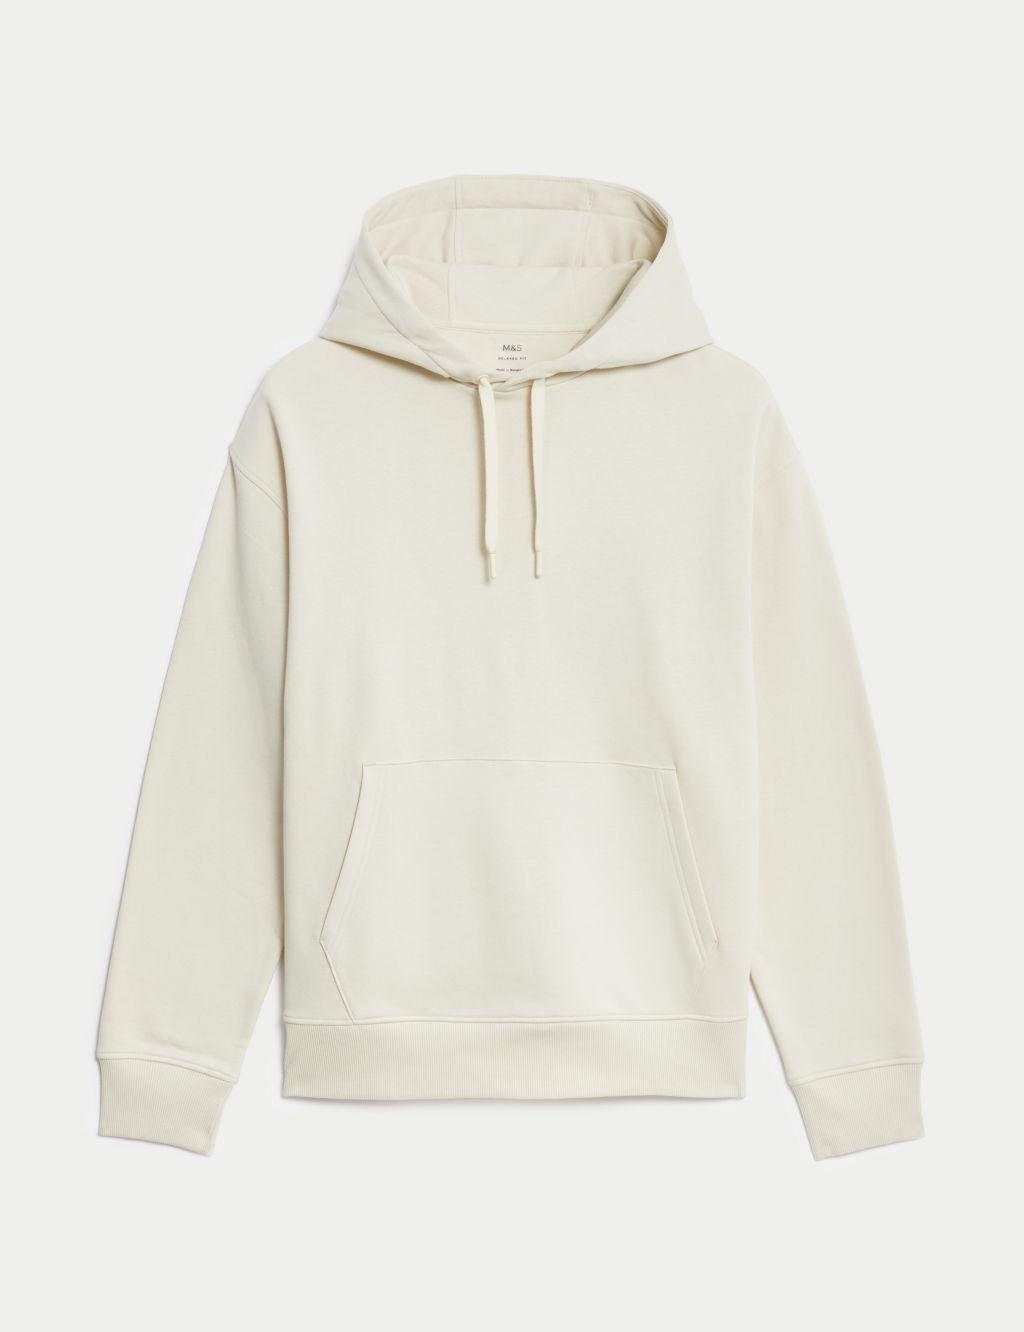 Oversized Cotton Rich Hoodie image 2